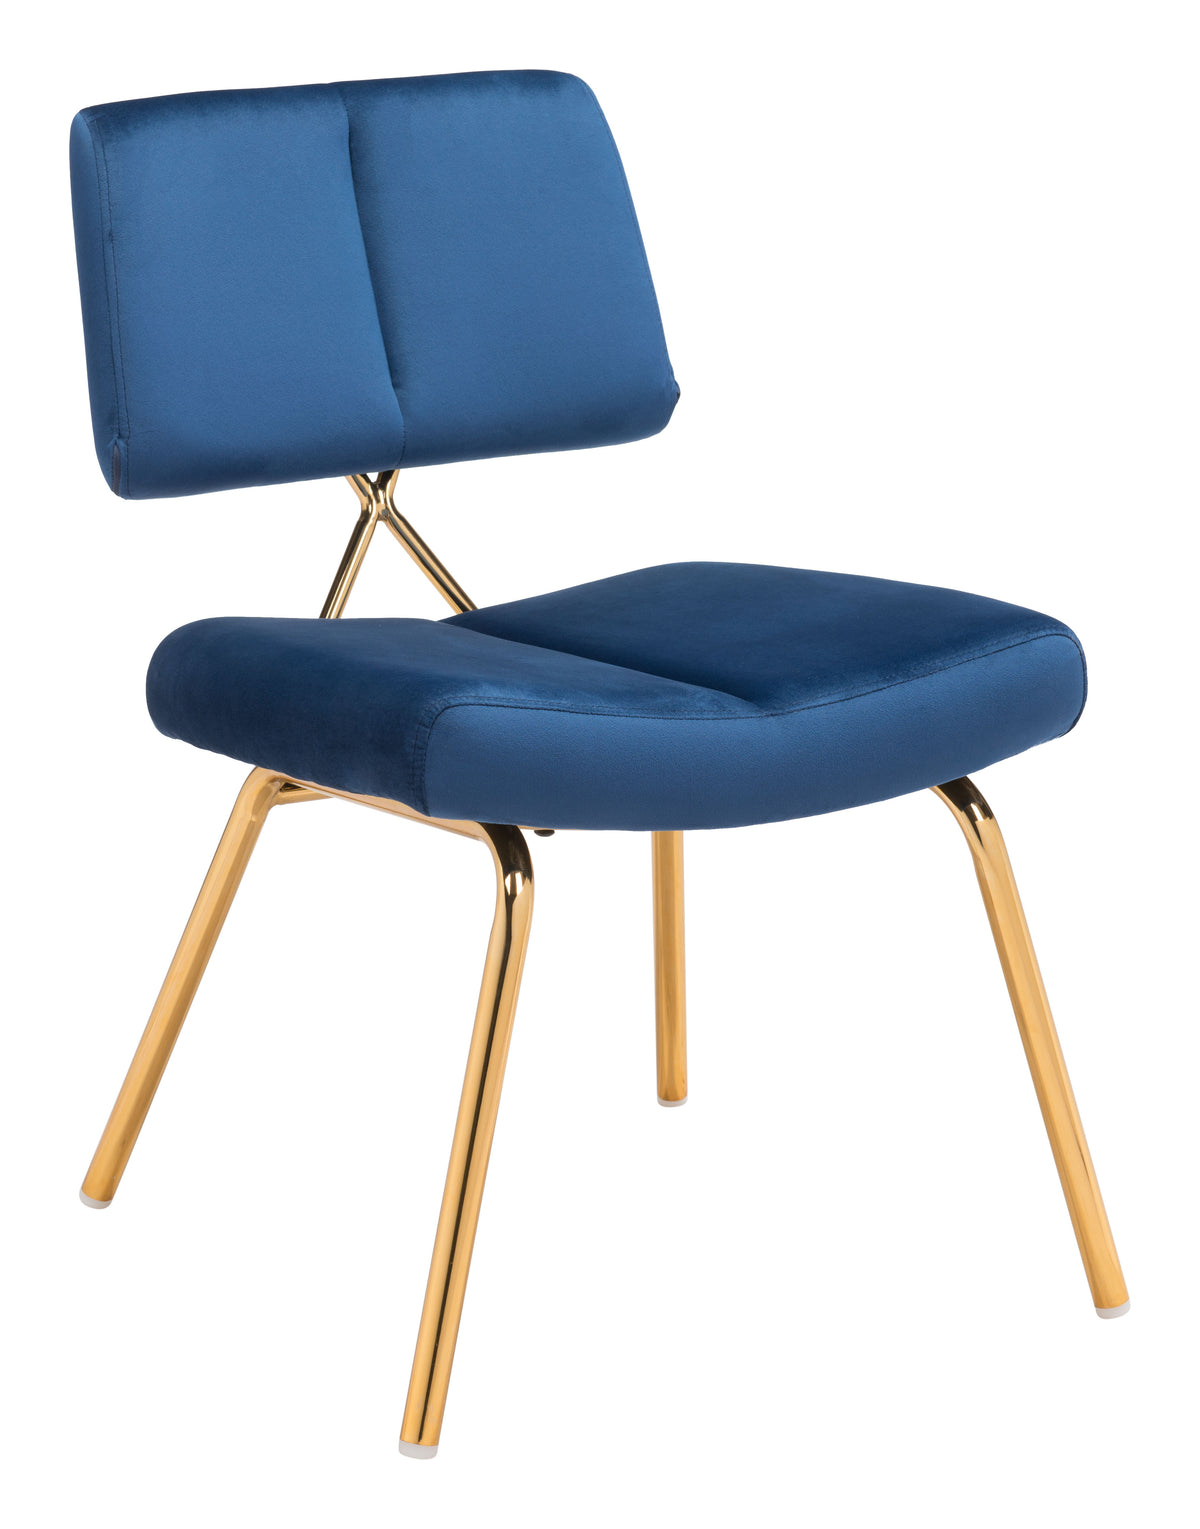 Nicole Dining Chair (Set of 2) Blue